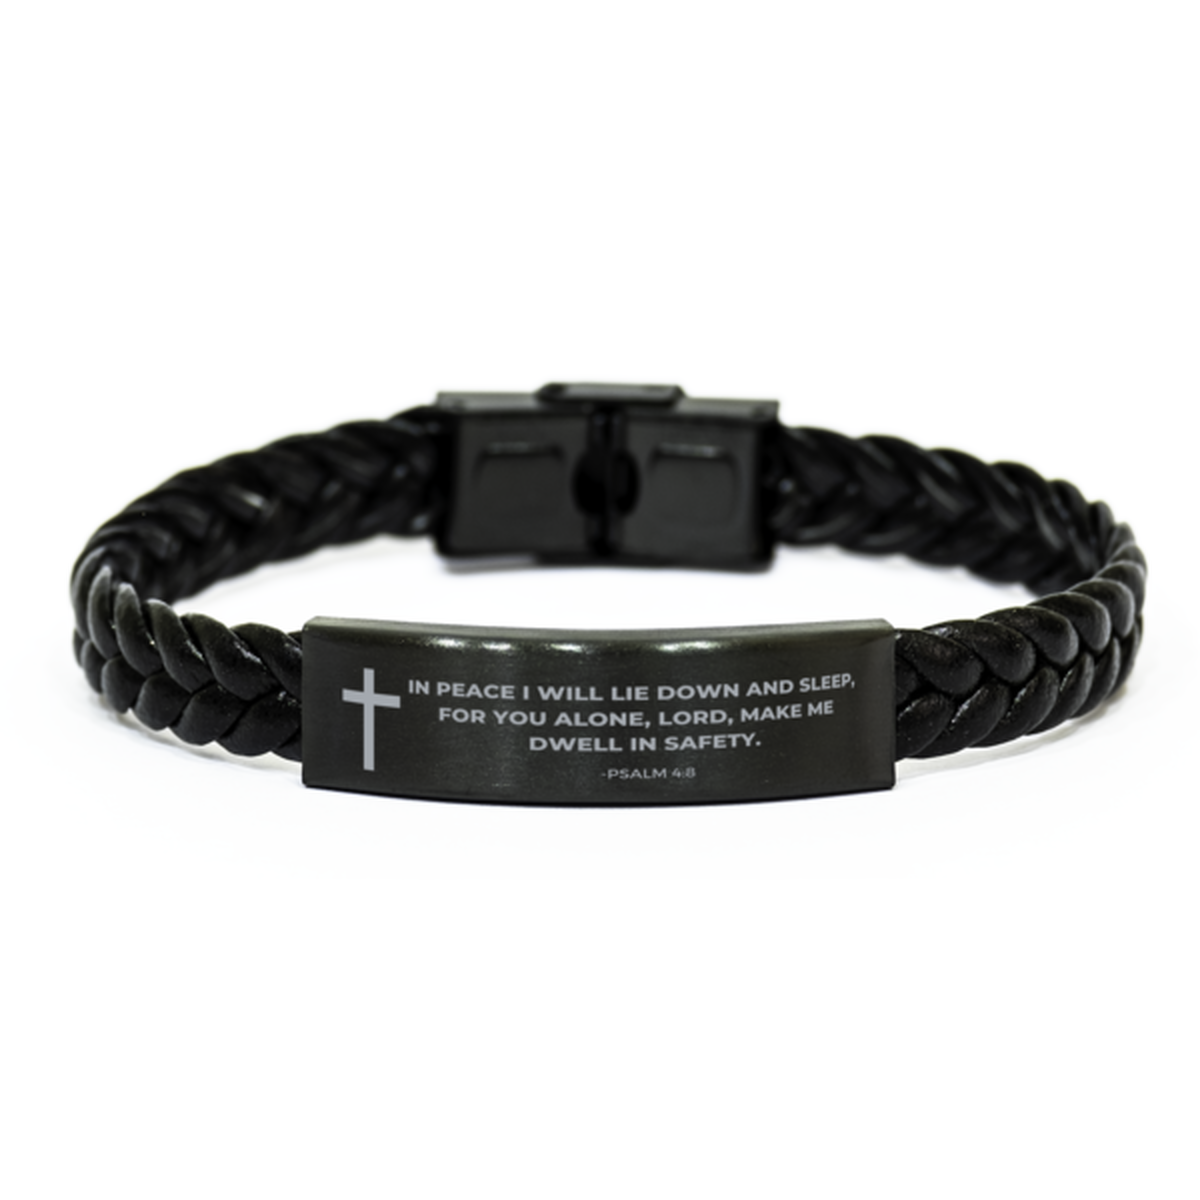 Baptism Gifts For Teenage Boys Girls, Christian Bible Verse Braided Leather Bracelet, In peace I will lie down and sleep, Catholic Confirmation Gifts for Son, Godson, Grandson, Nephew